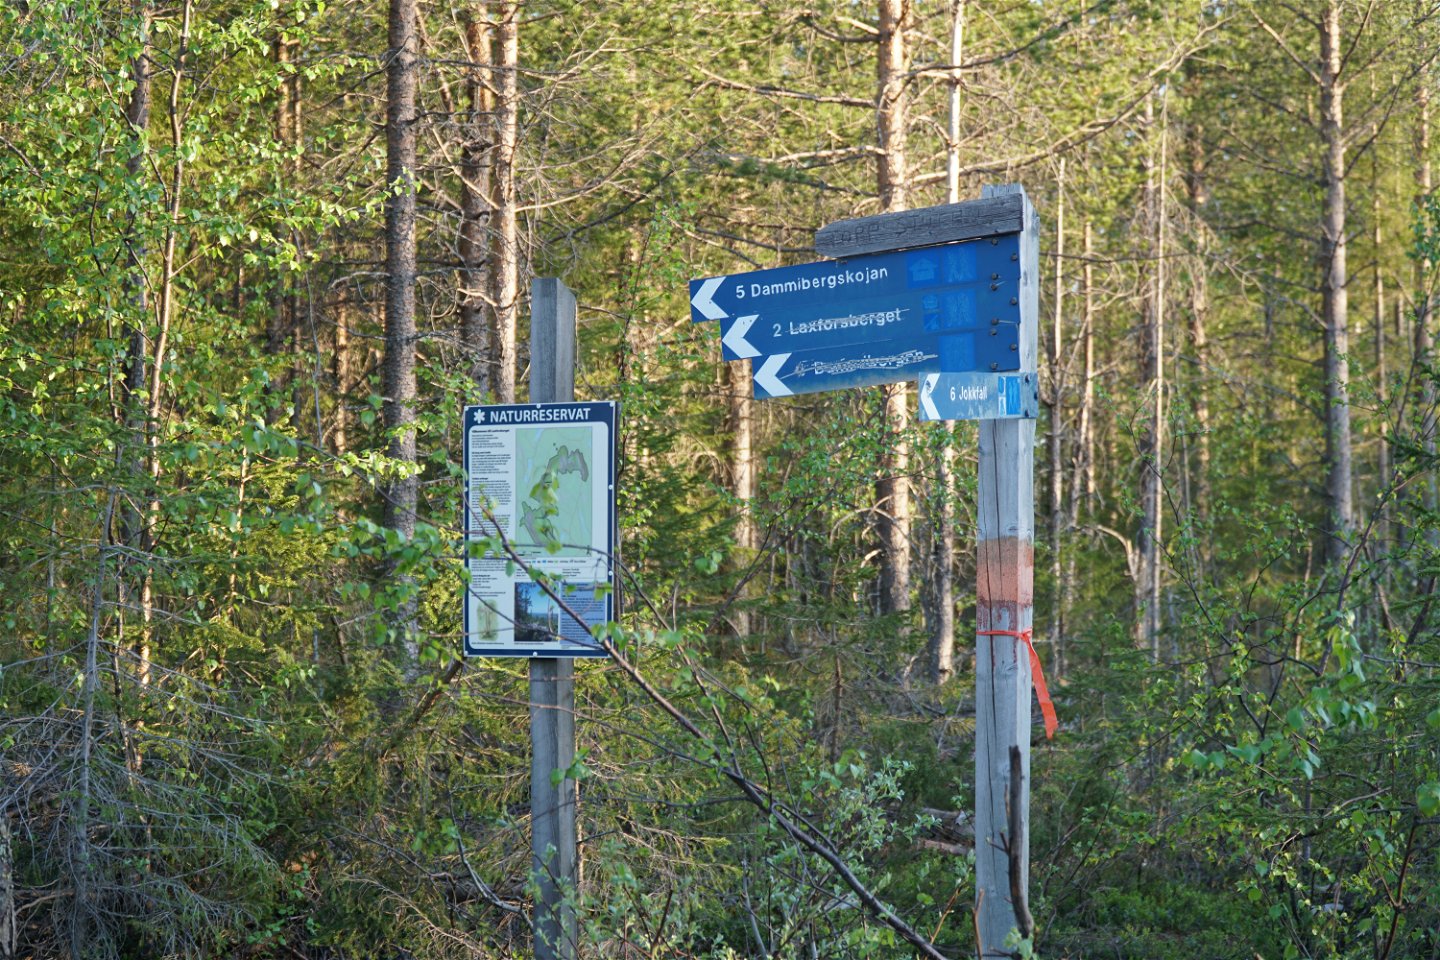 Signs at the entrance for the trail